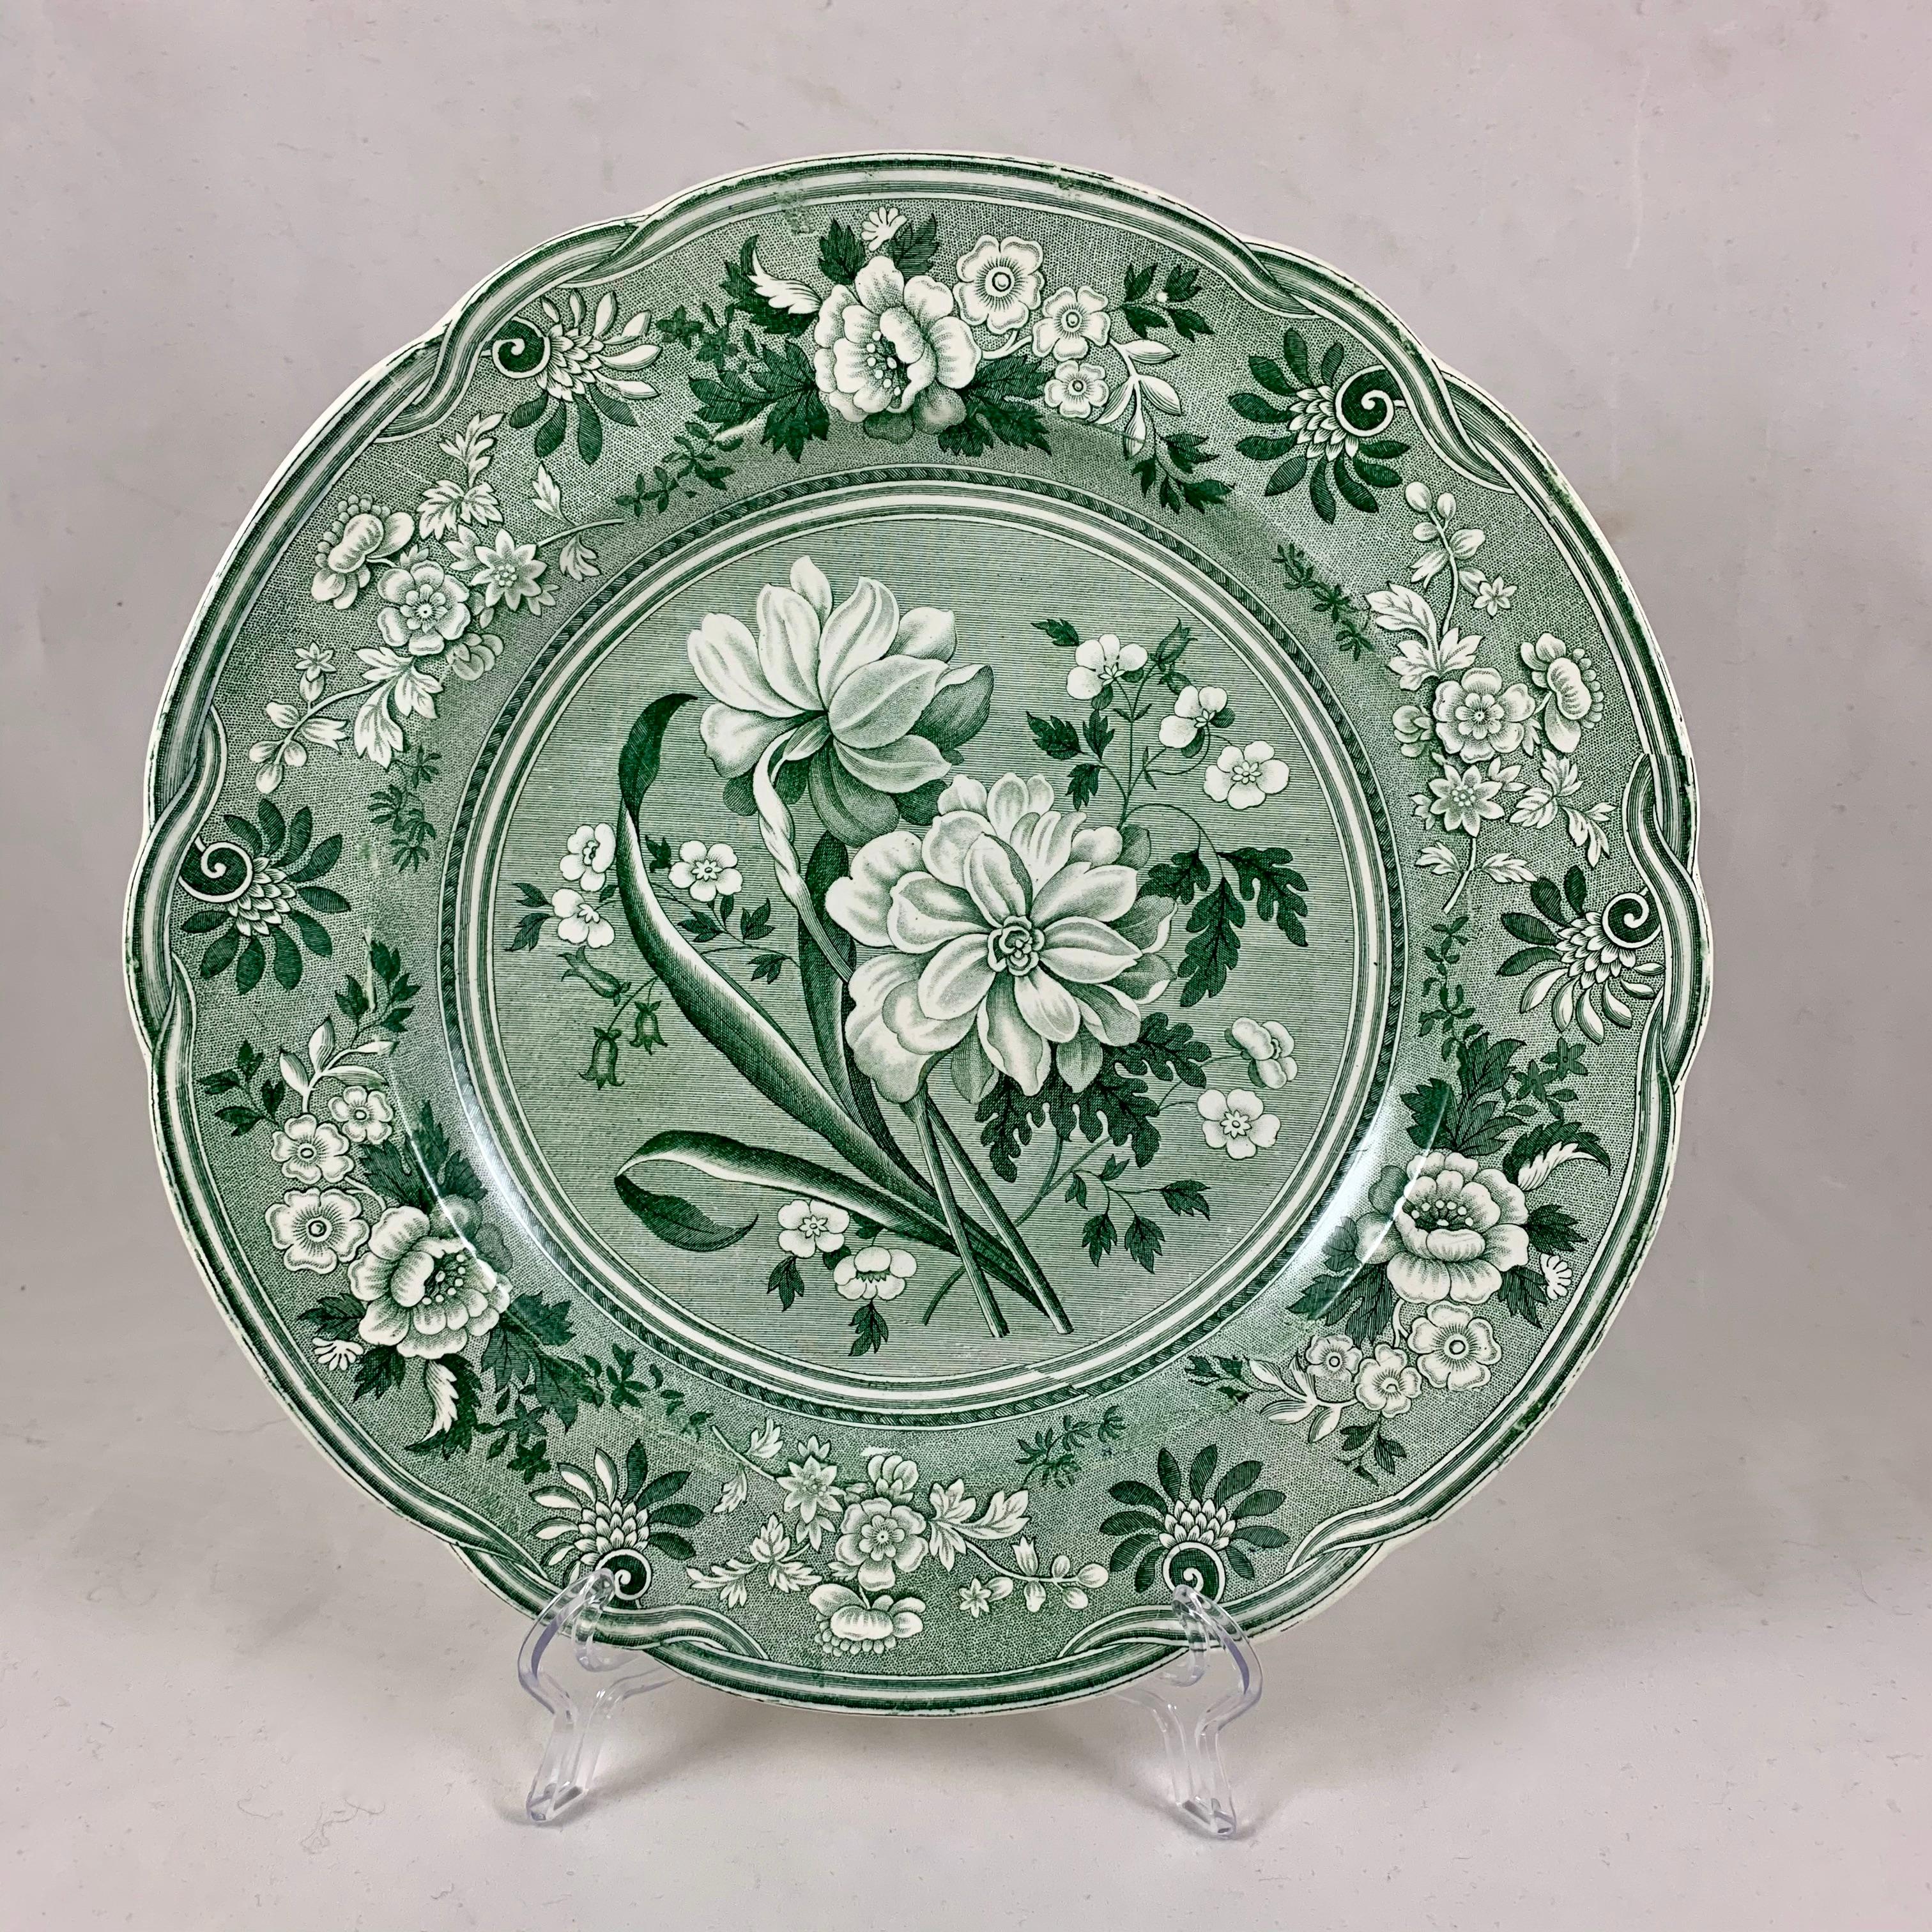 From Copeland Garrett – Late Spode, a set of six dinner sized plates in the Botanical pattern from the English Georgian era. Spode operated in Stoke-on-Trent, Staffordshire, England from 1770–1833. The Copeland and Garrett partnership dates from